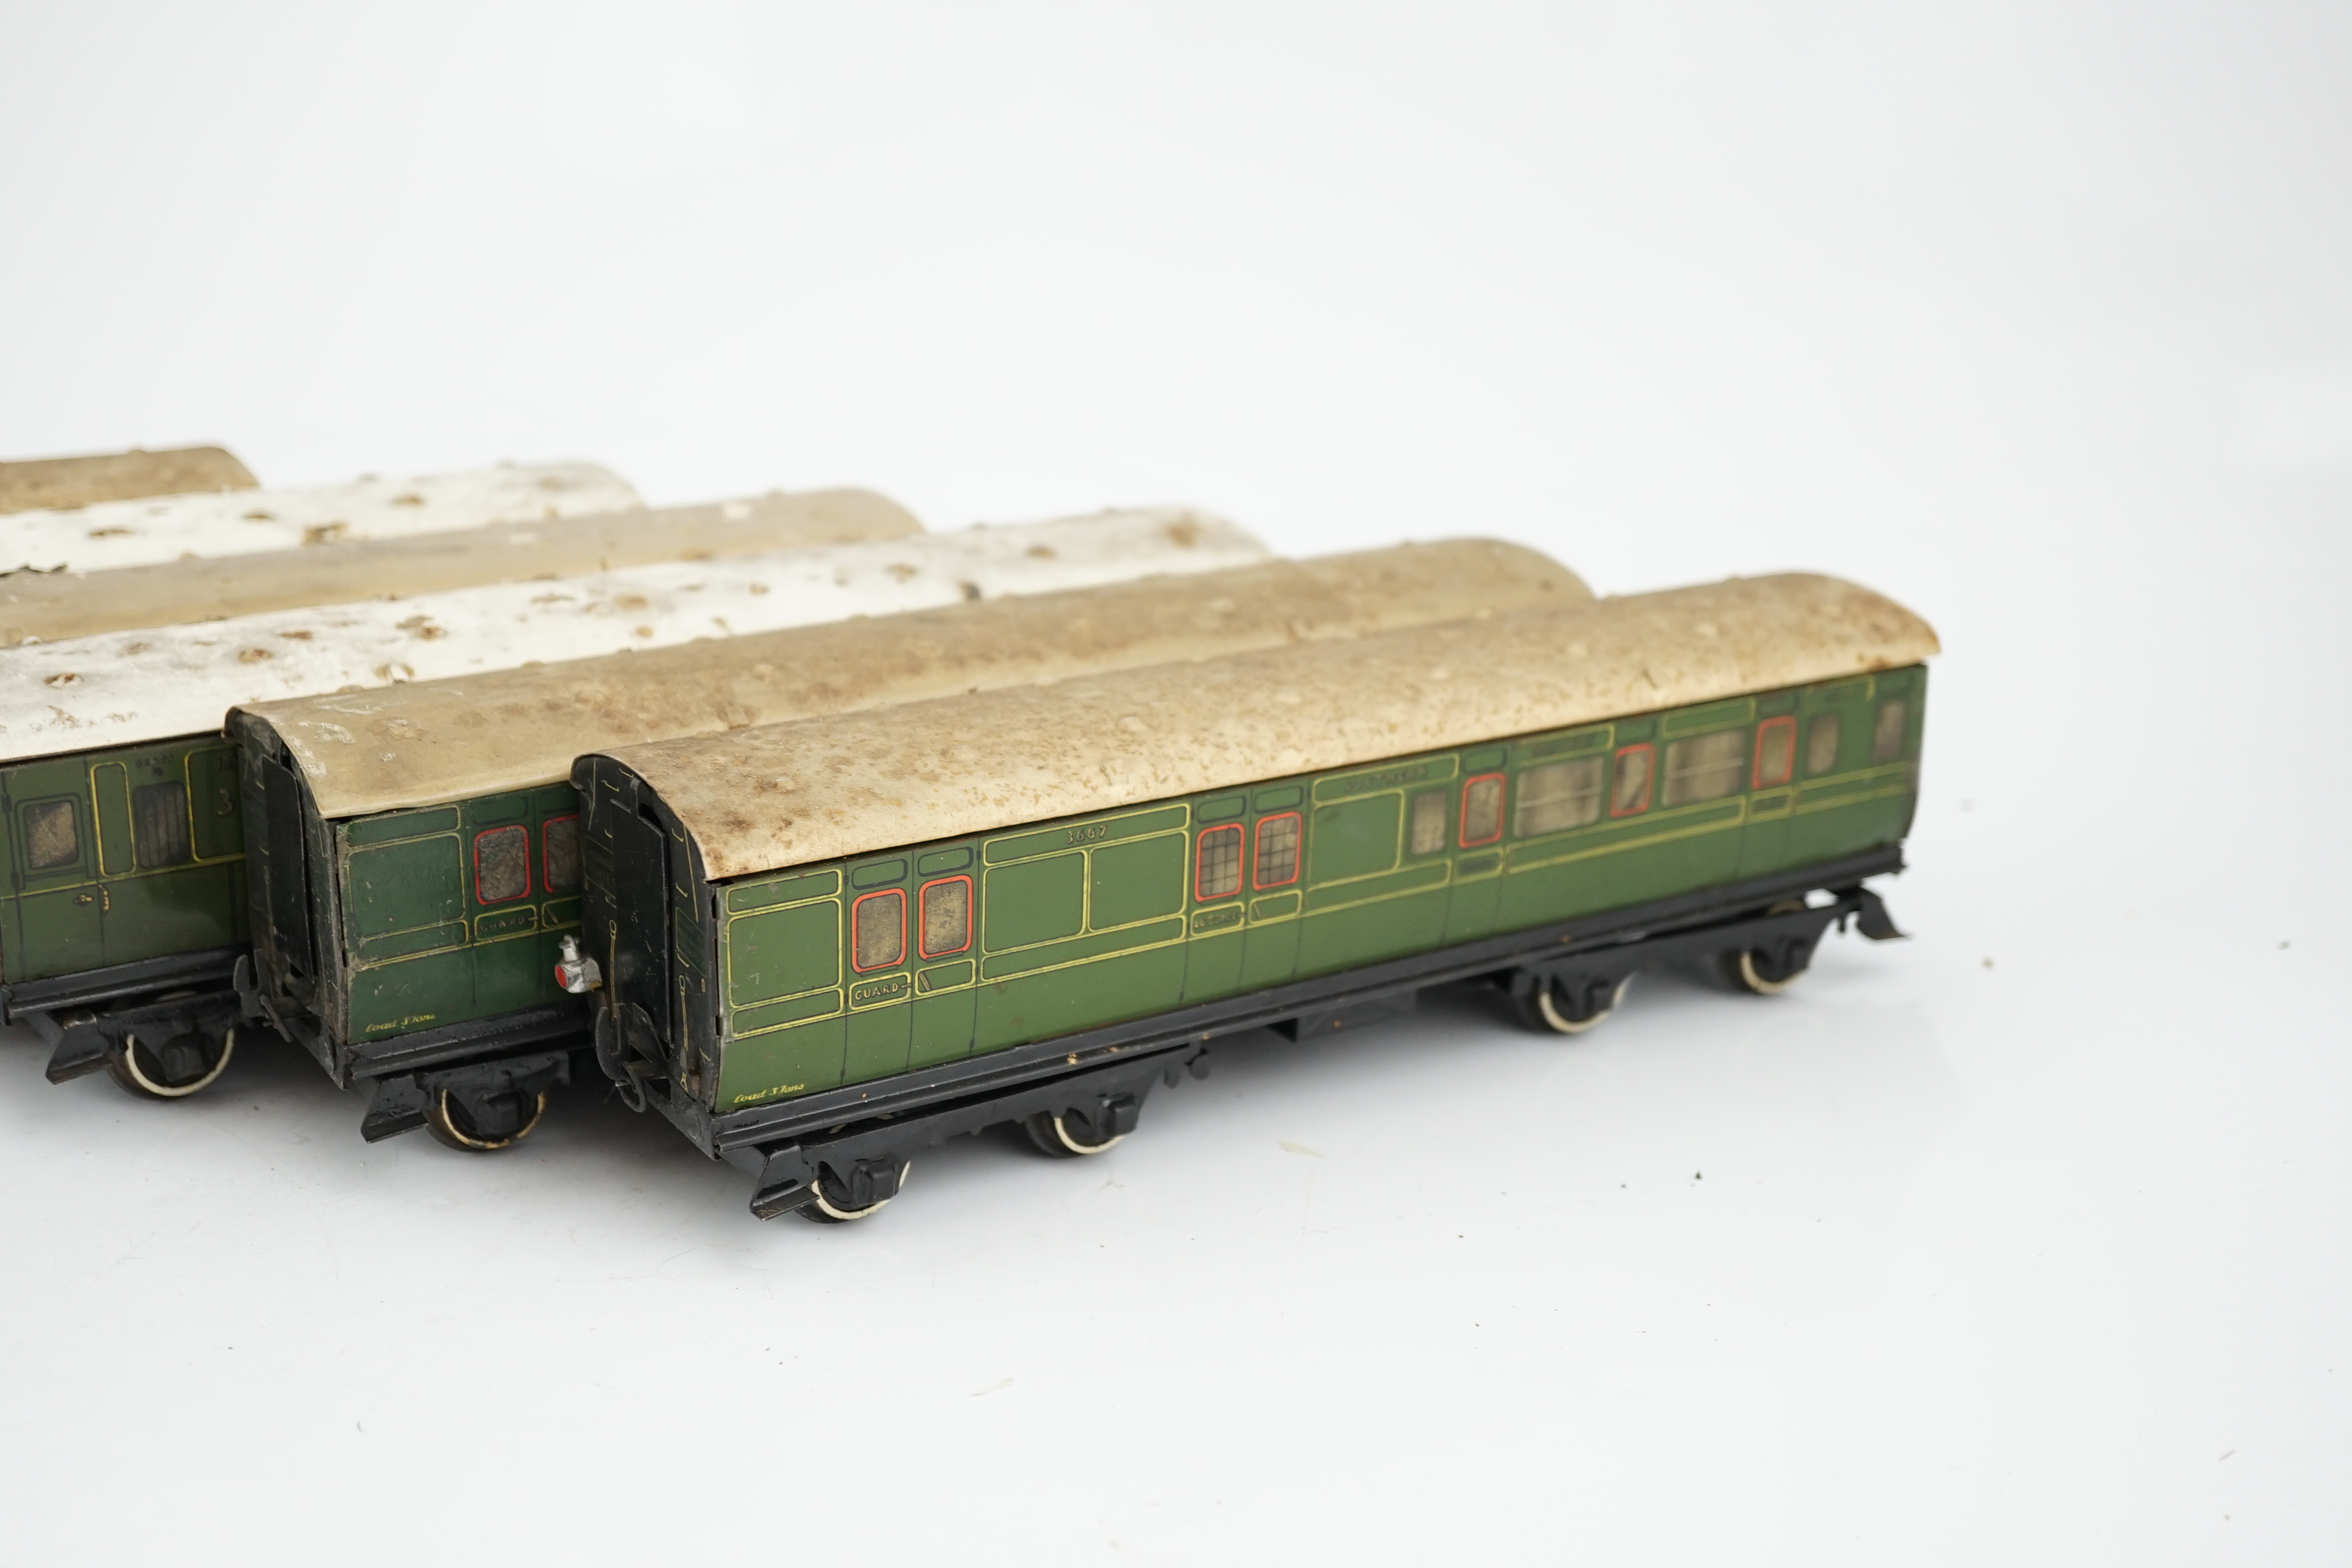 Six Hornby 0 gauge tinplate No.2 coaches in Southern Railway livery, one coach adapted to a - Image 5 of 12